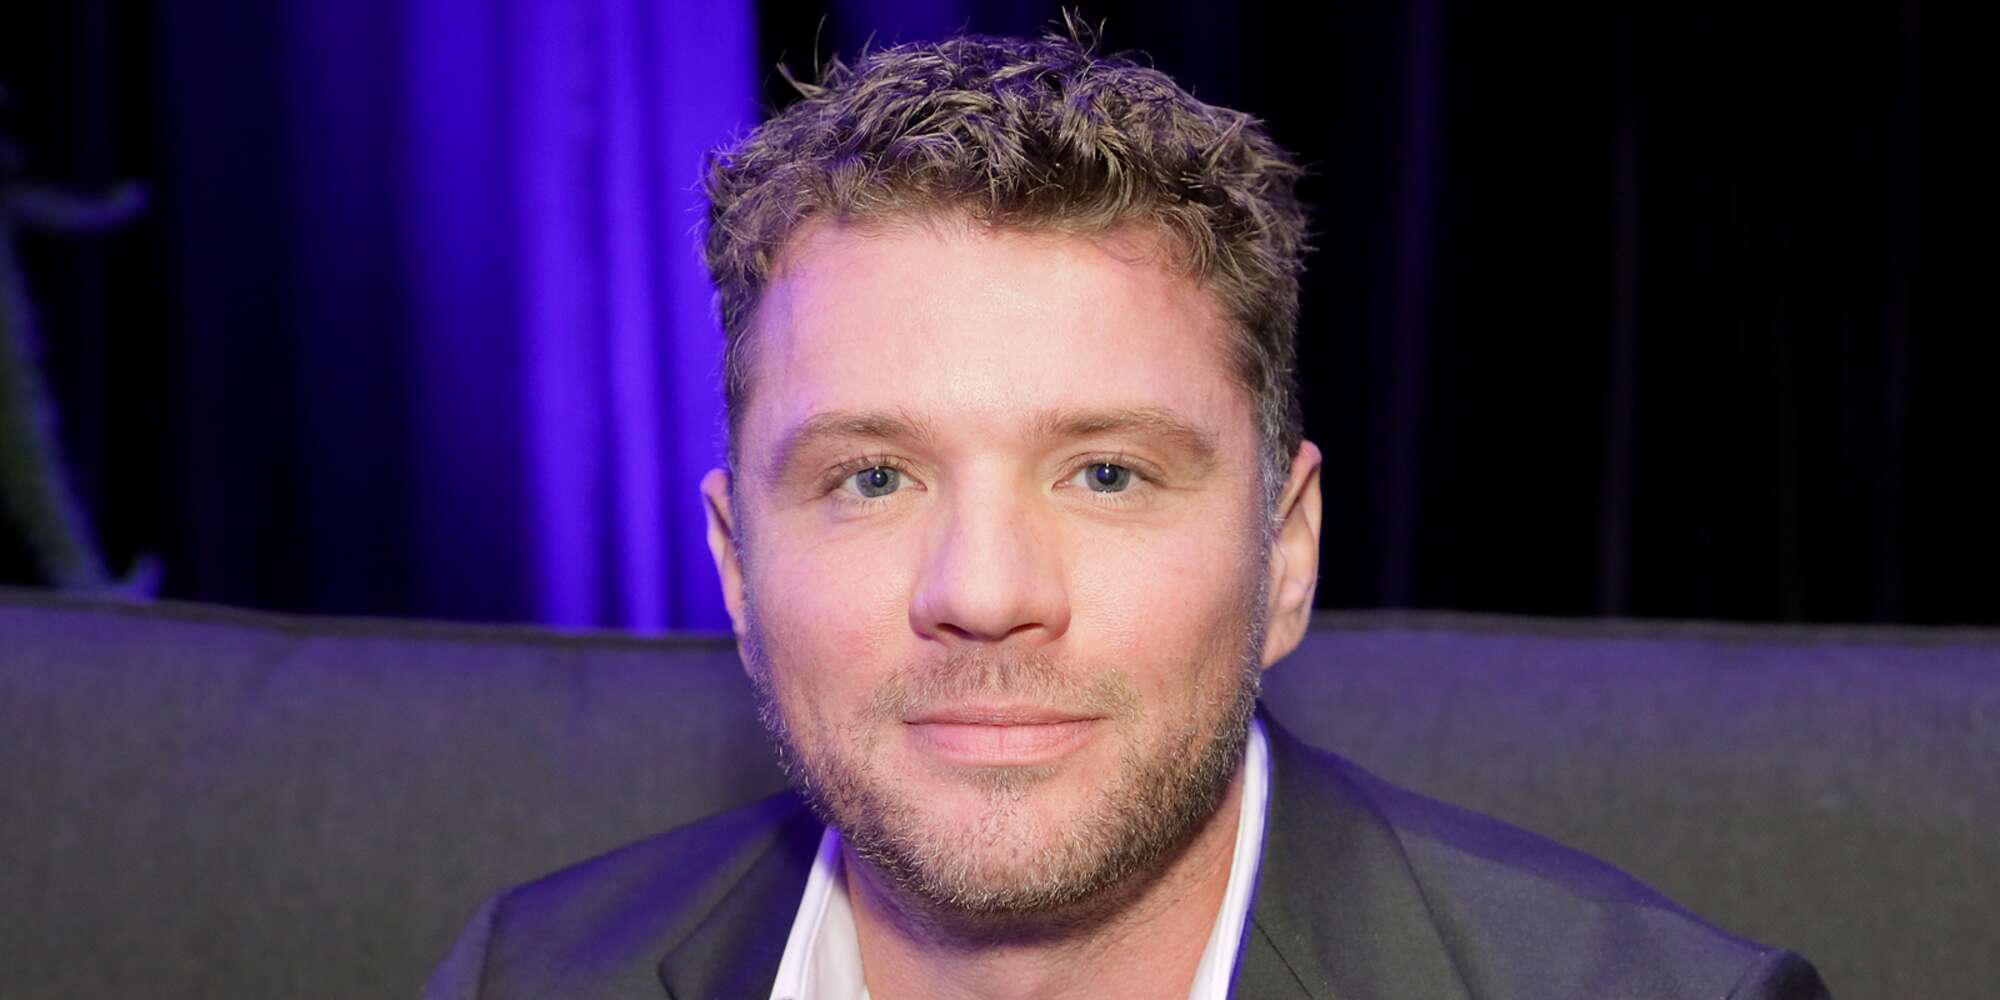 Ryan Phillippe commemorates his longest stretch of sobriety